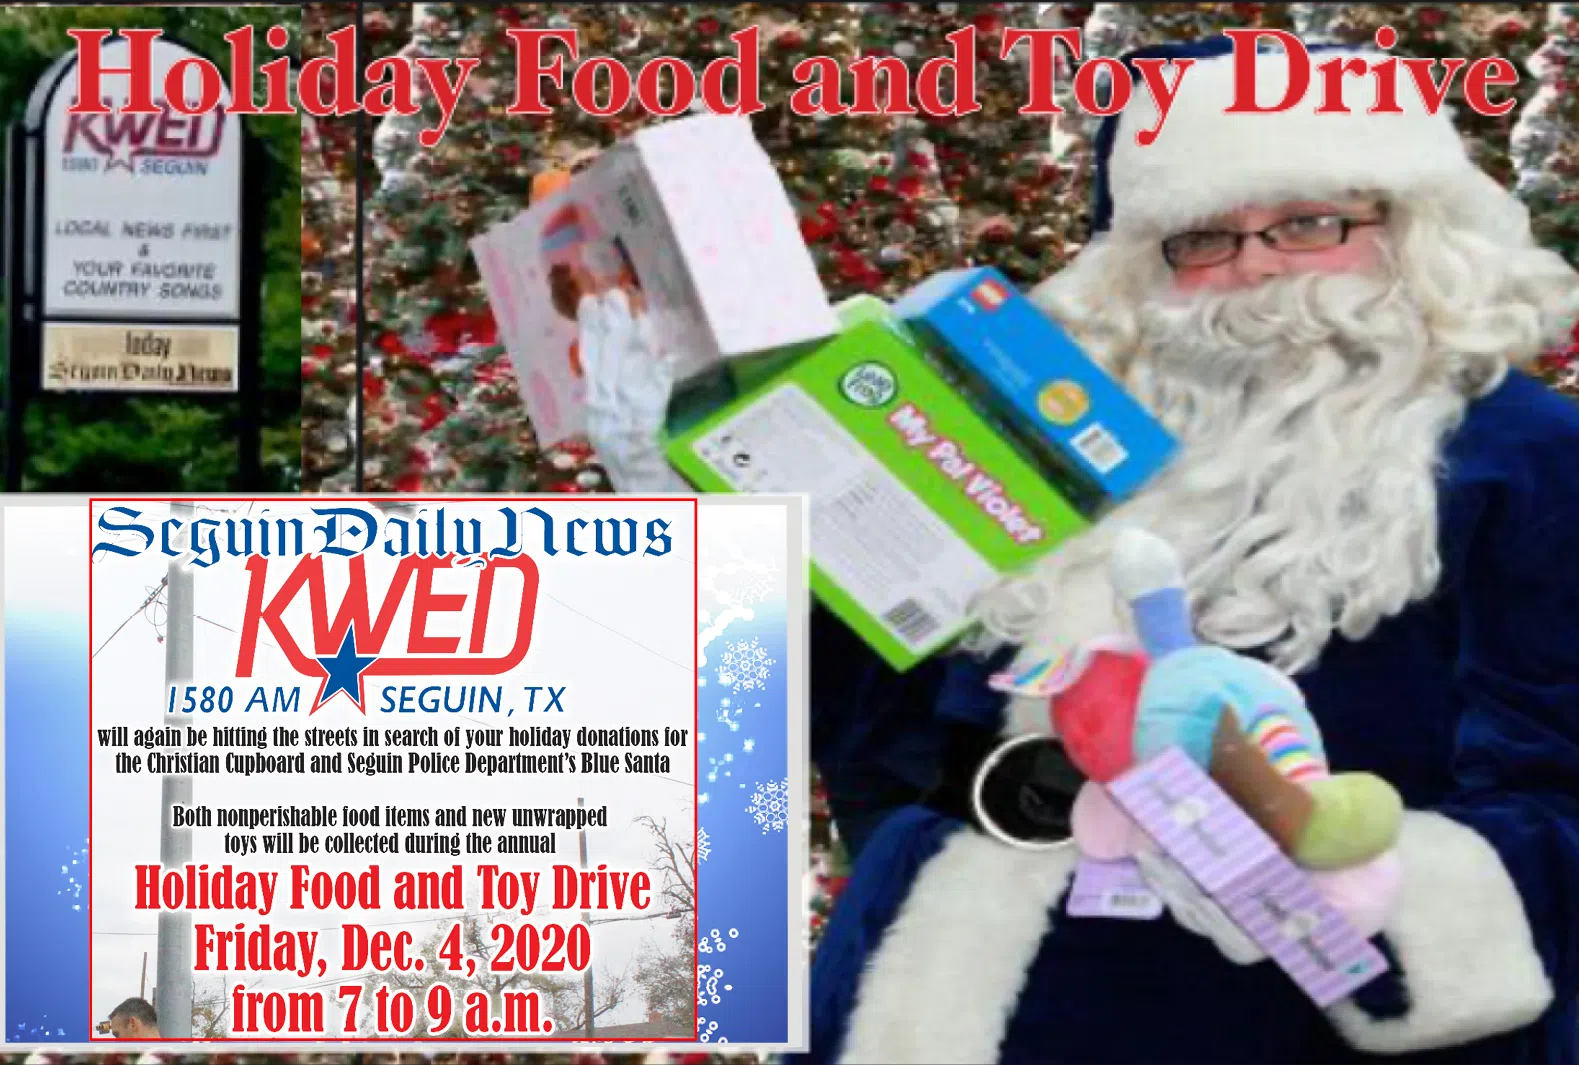 Increased needs in the community leads KWED to still host annual Holiday Food and Toy Drive